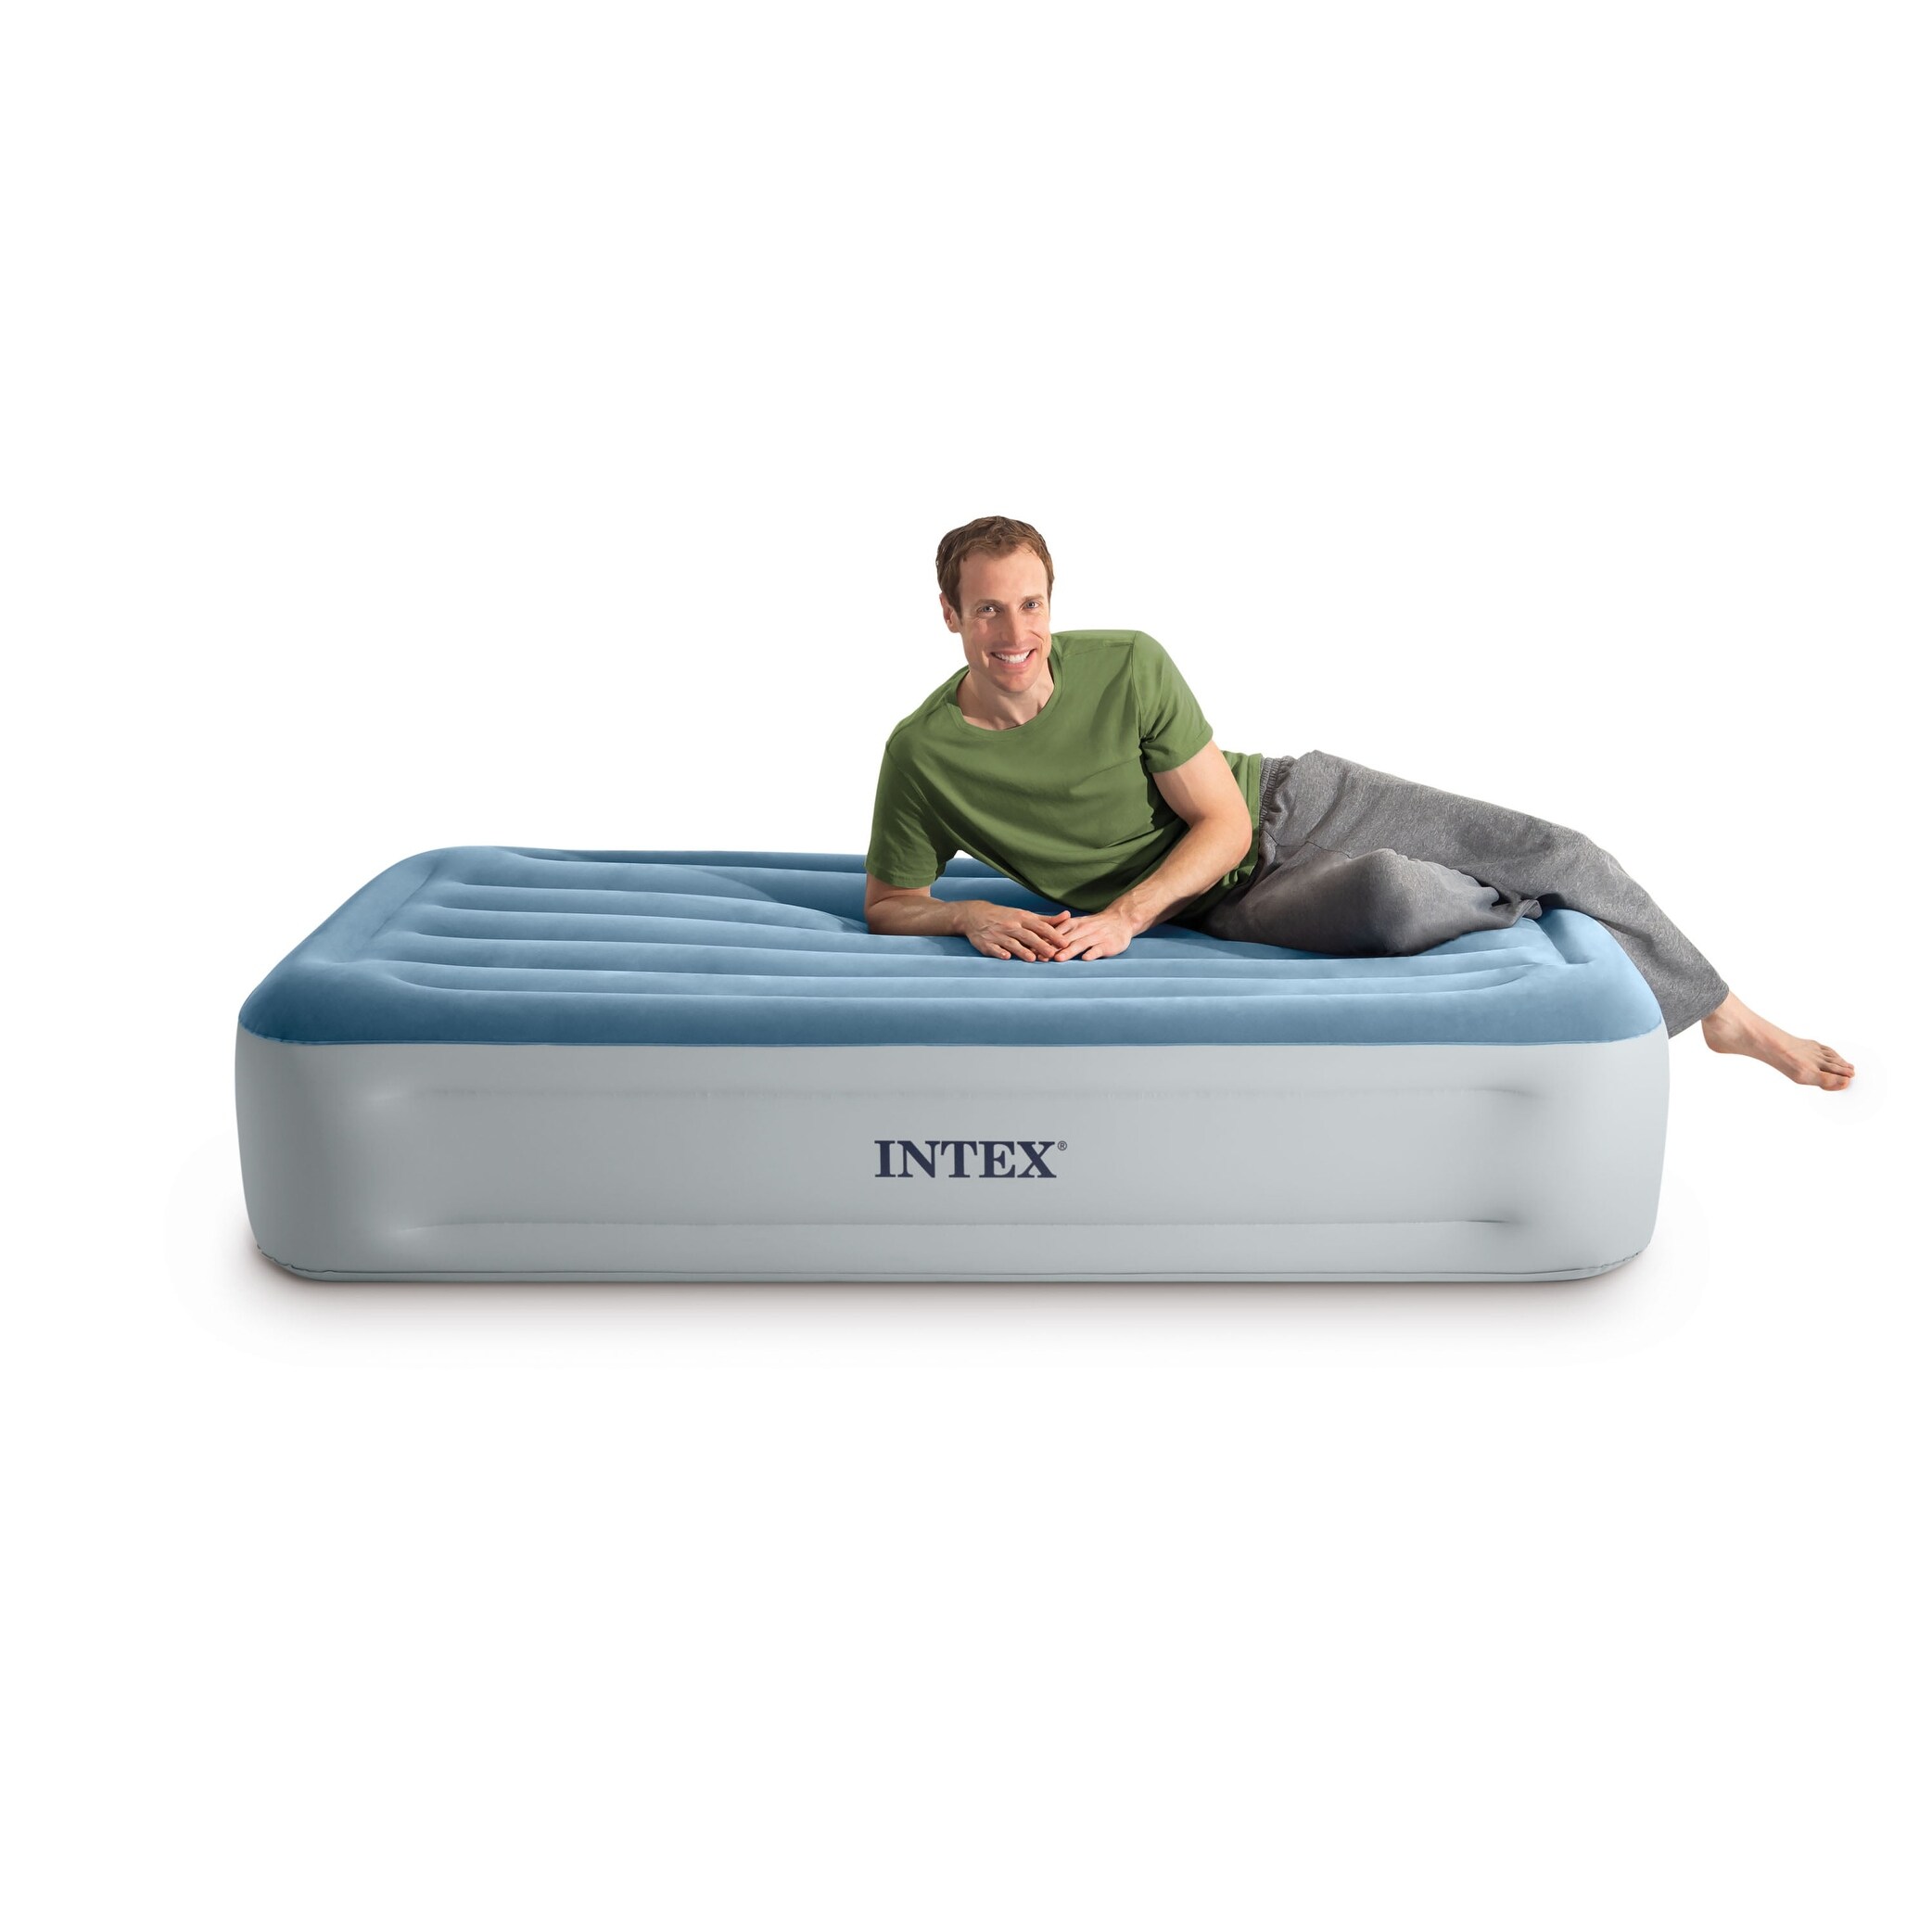 https://ak1.ostkcdn.com/images/products/is/images/direct/8999422071e8dcfc1c8856f624b2c3203a0703d0/15%22-Essential-Rest-Dura-Beam-Airbed-Mattress-with-Internal-Pump-included--TWIN.jpg